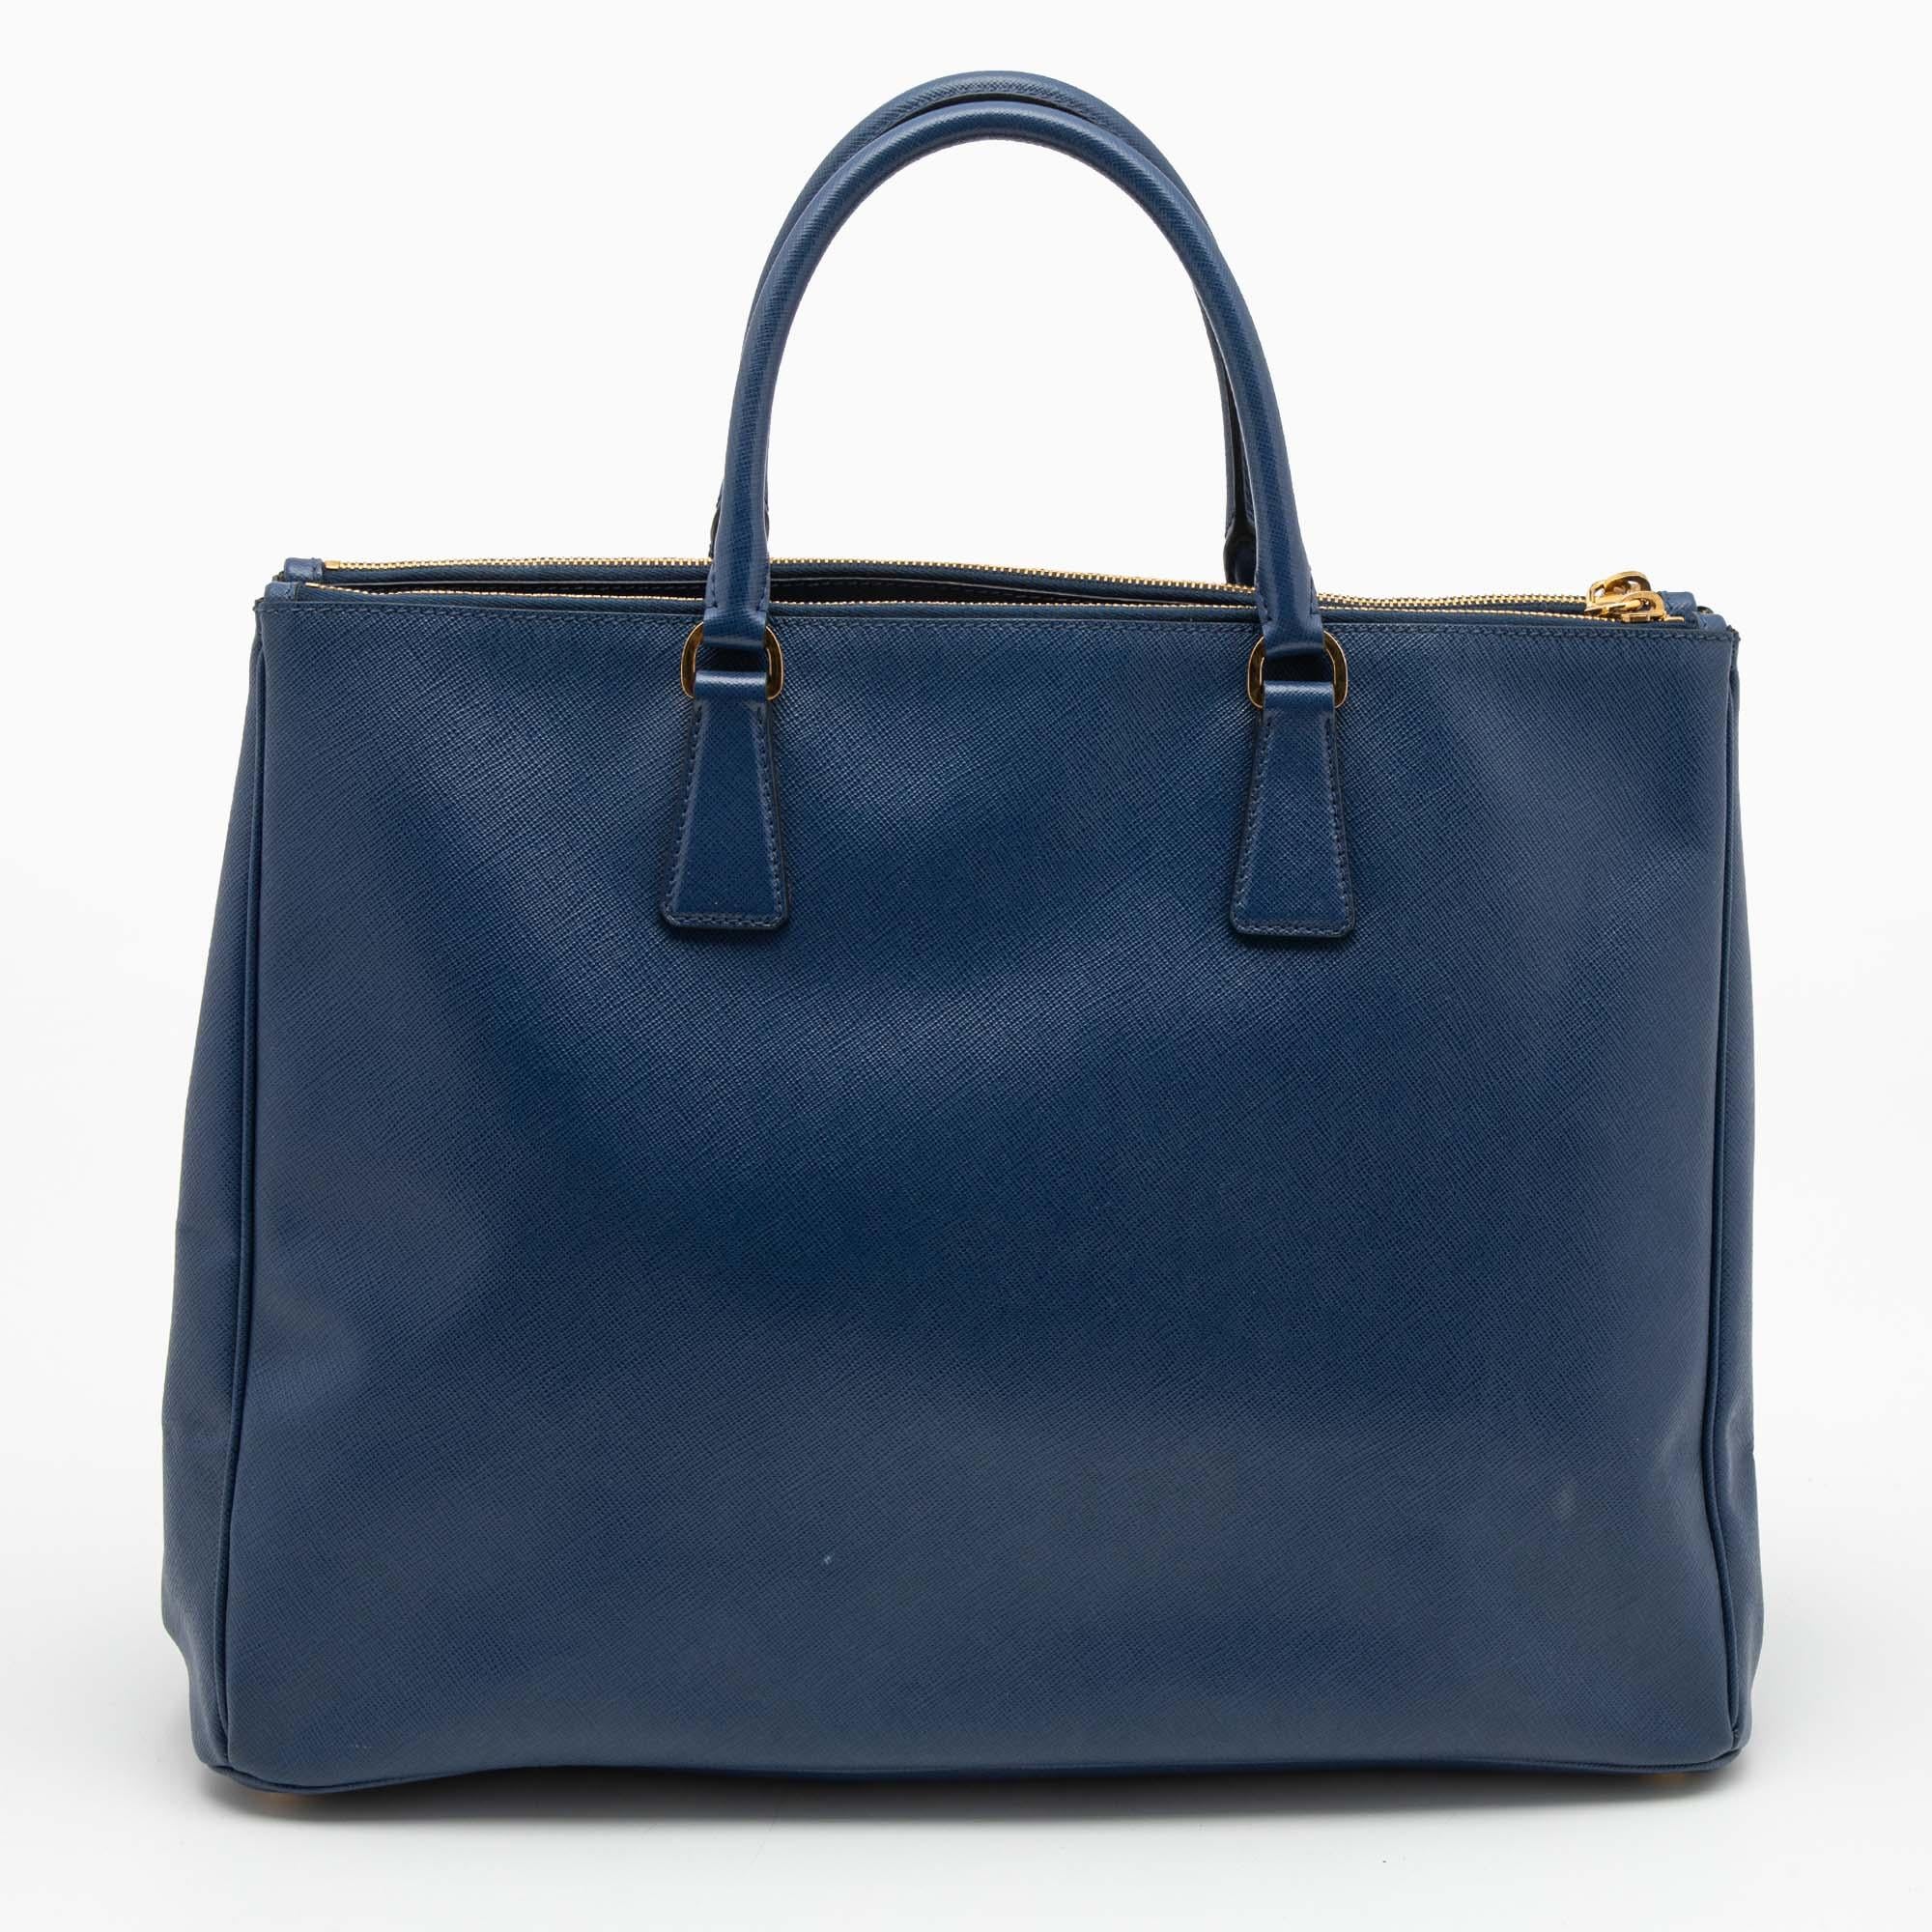 Loved for its classic appeal and functional design, Galleria is one of the most iconic and popular bags from the house of Prada. This beauty in navy blue is crafted from Saffiano lux leather and is equipped with two top handles, the brand logo at